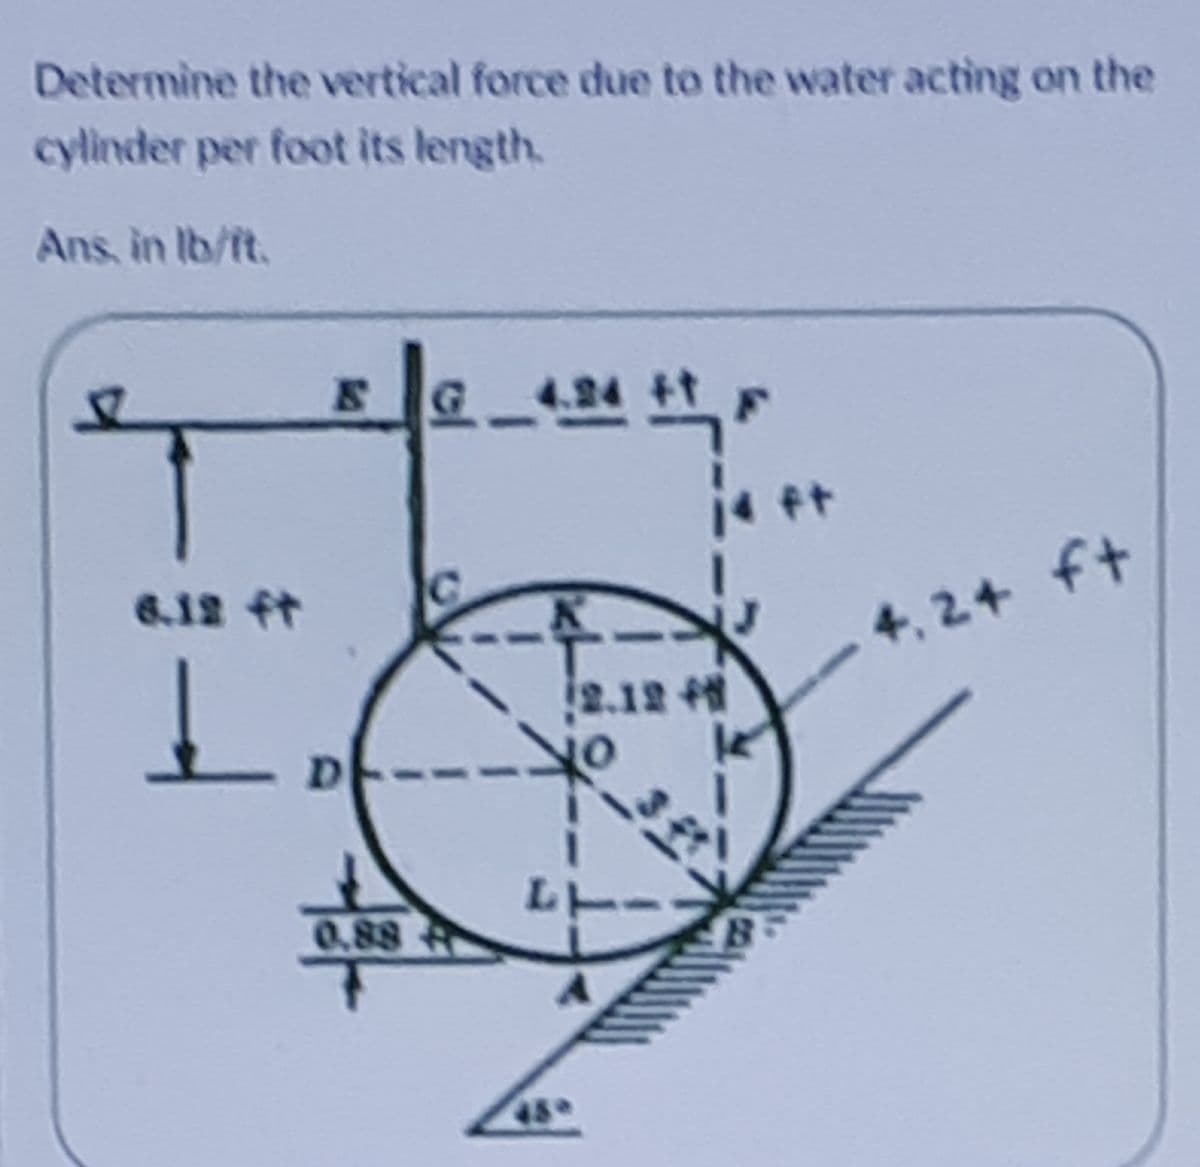 Determine the vertical force due to the water acting on the
cylinder per foot its length.
Ans, in Ib/ft.
4.24 ttF
ft
6.12 ft
4.24 ft
Lo
2.12
LT
0.88 R
45
of
